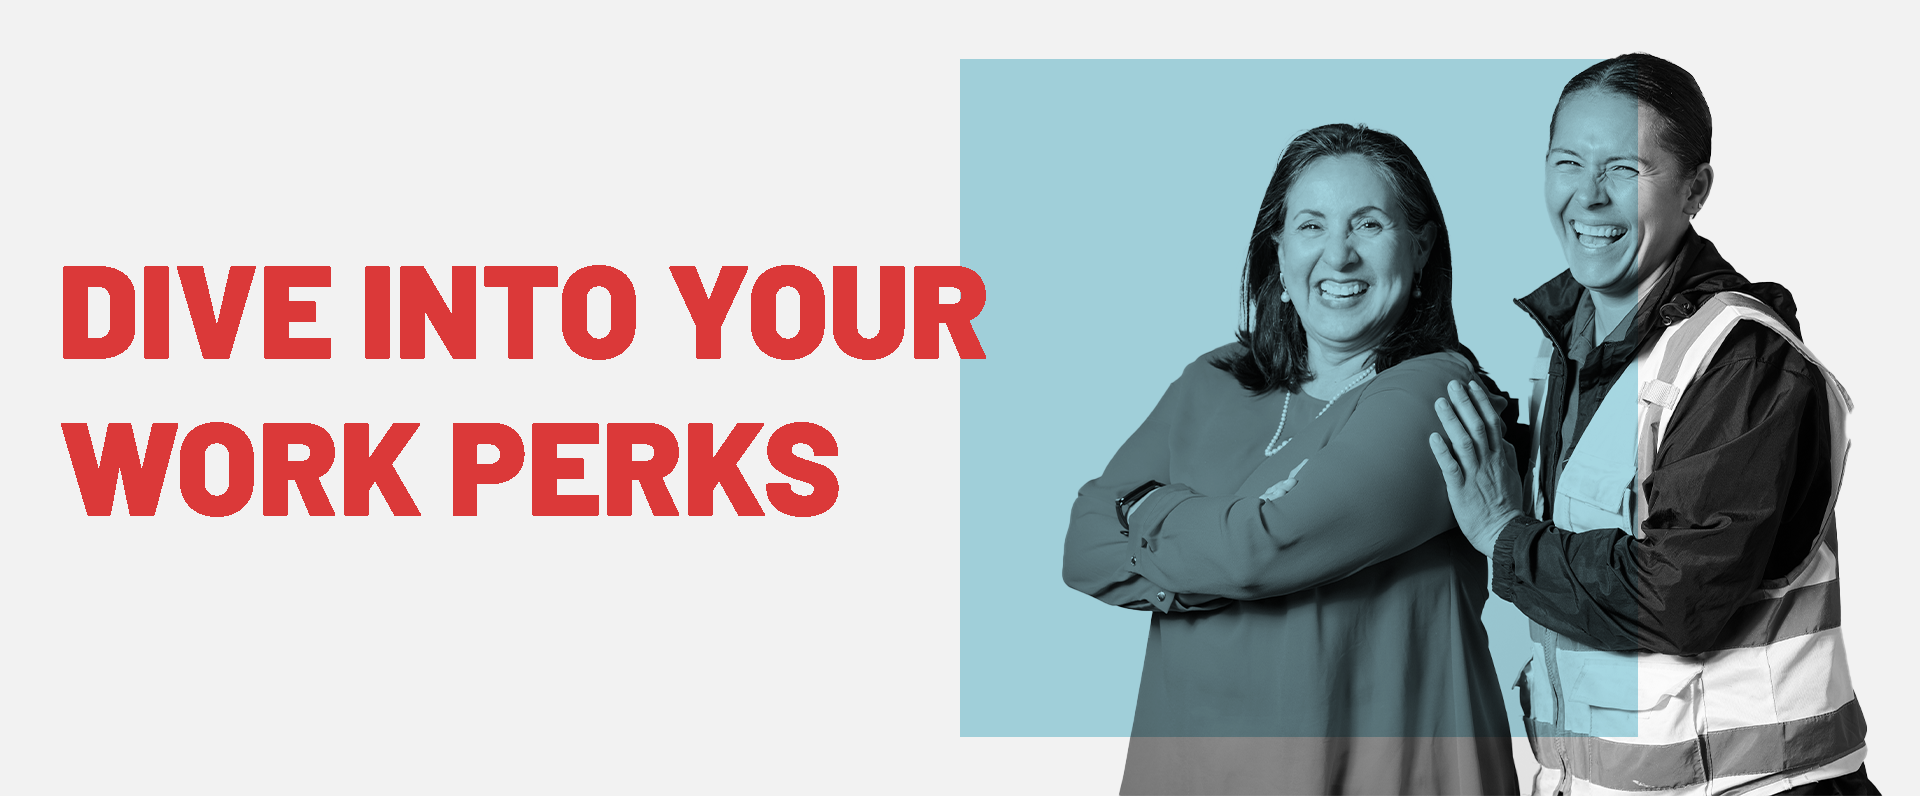 Dive Into Your Work Perks 2